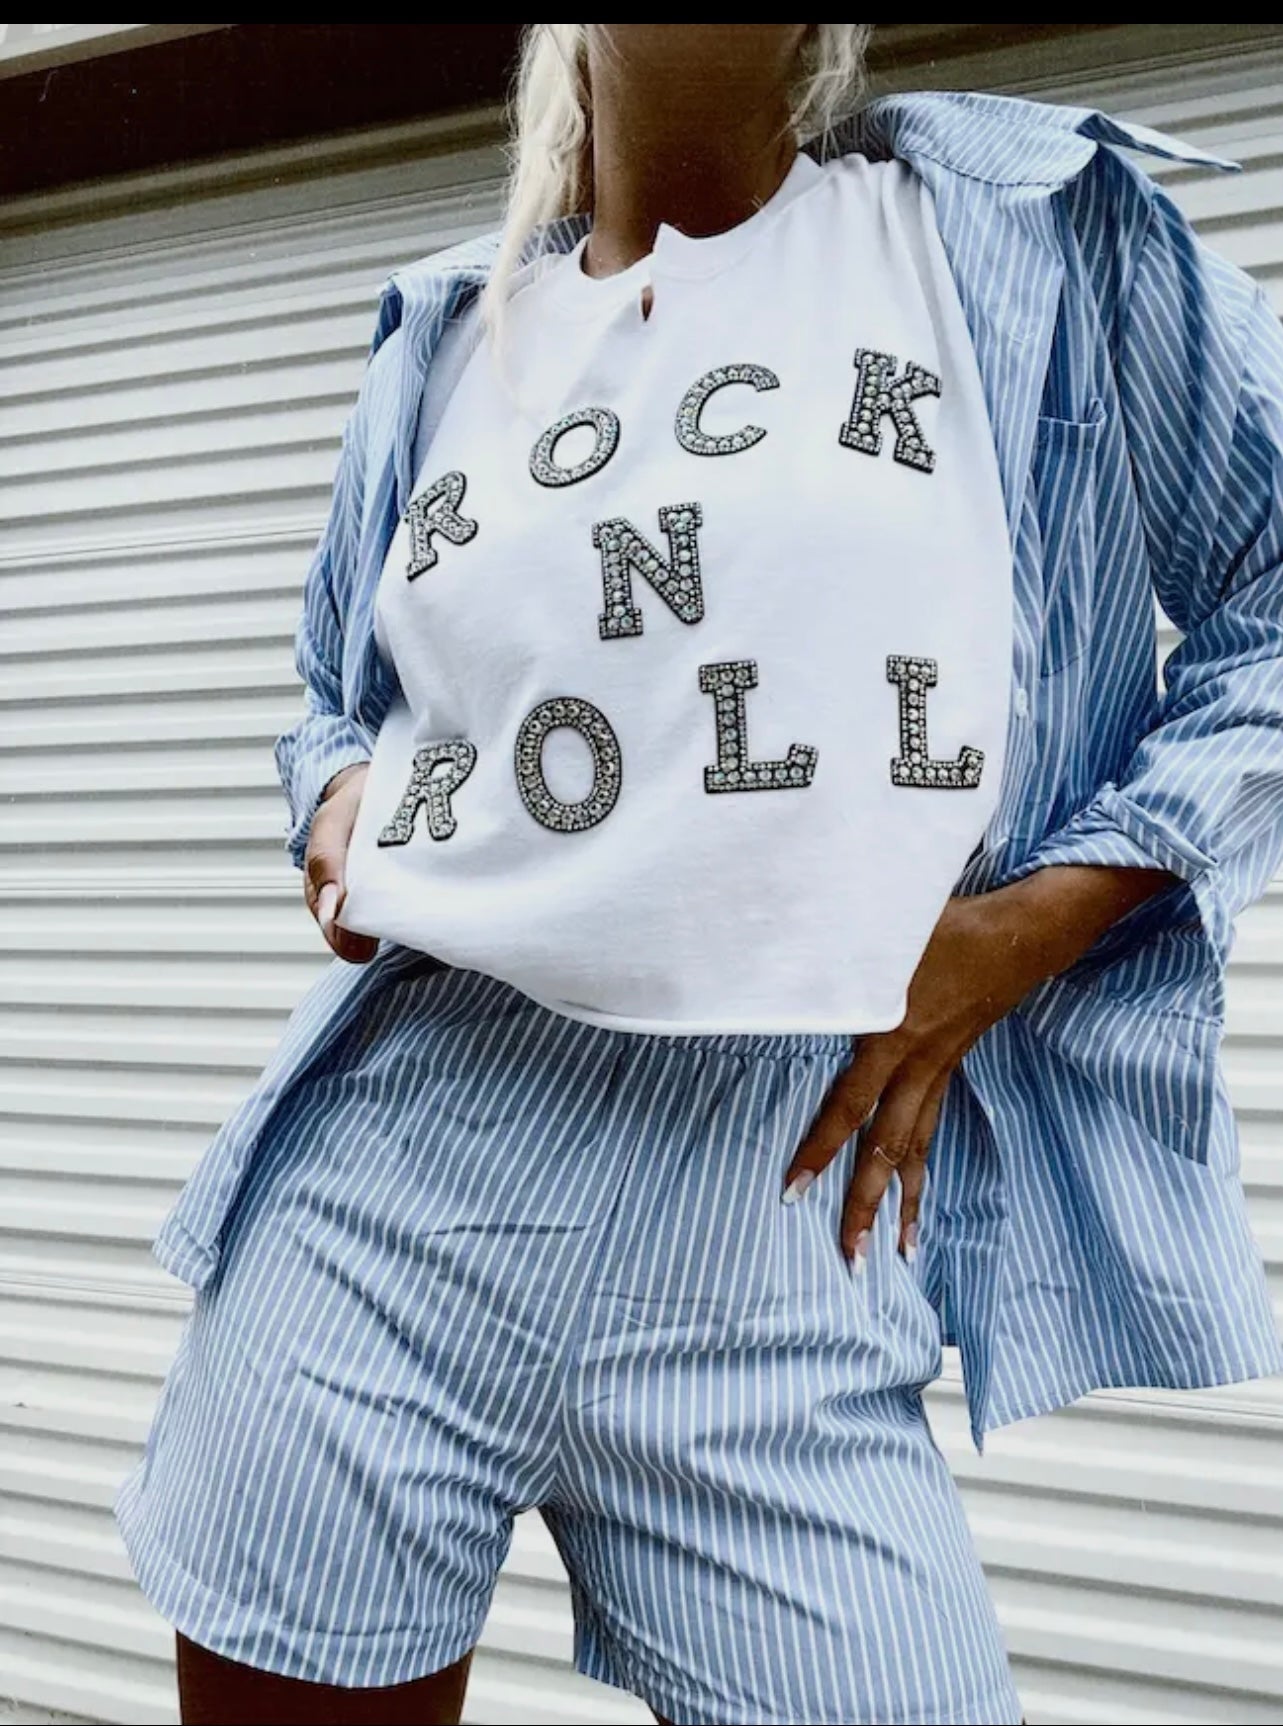 Rock and Roll cropped tee - white